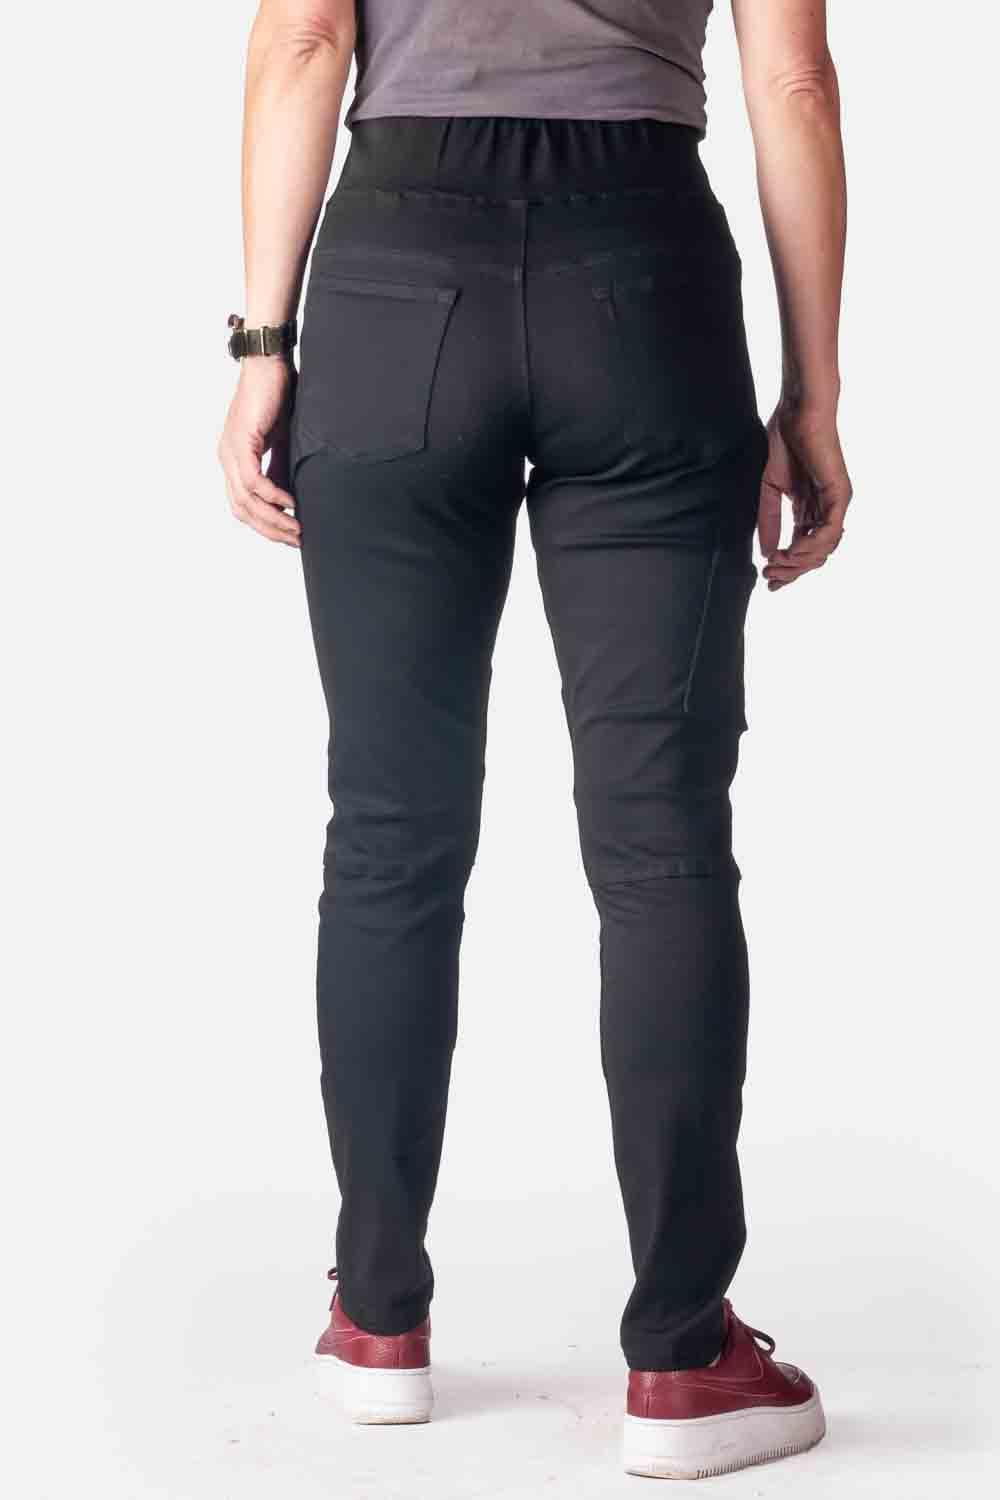 Dovetail Workwear Women's Black Work Pants (2/4 X 31) in the Pants  department at